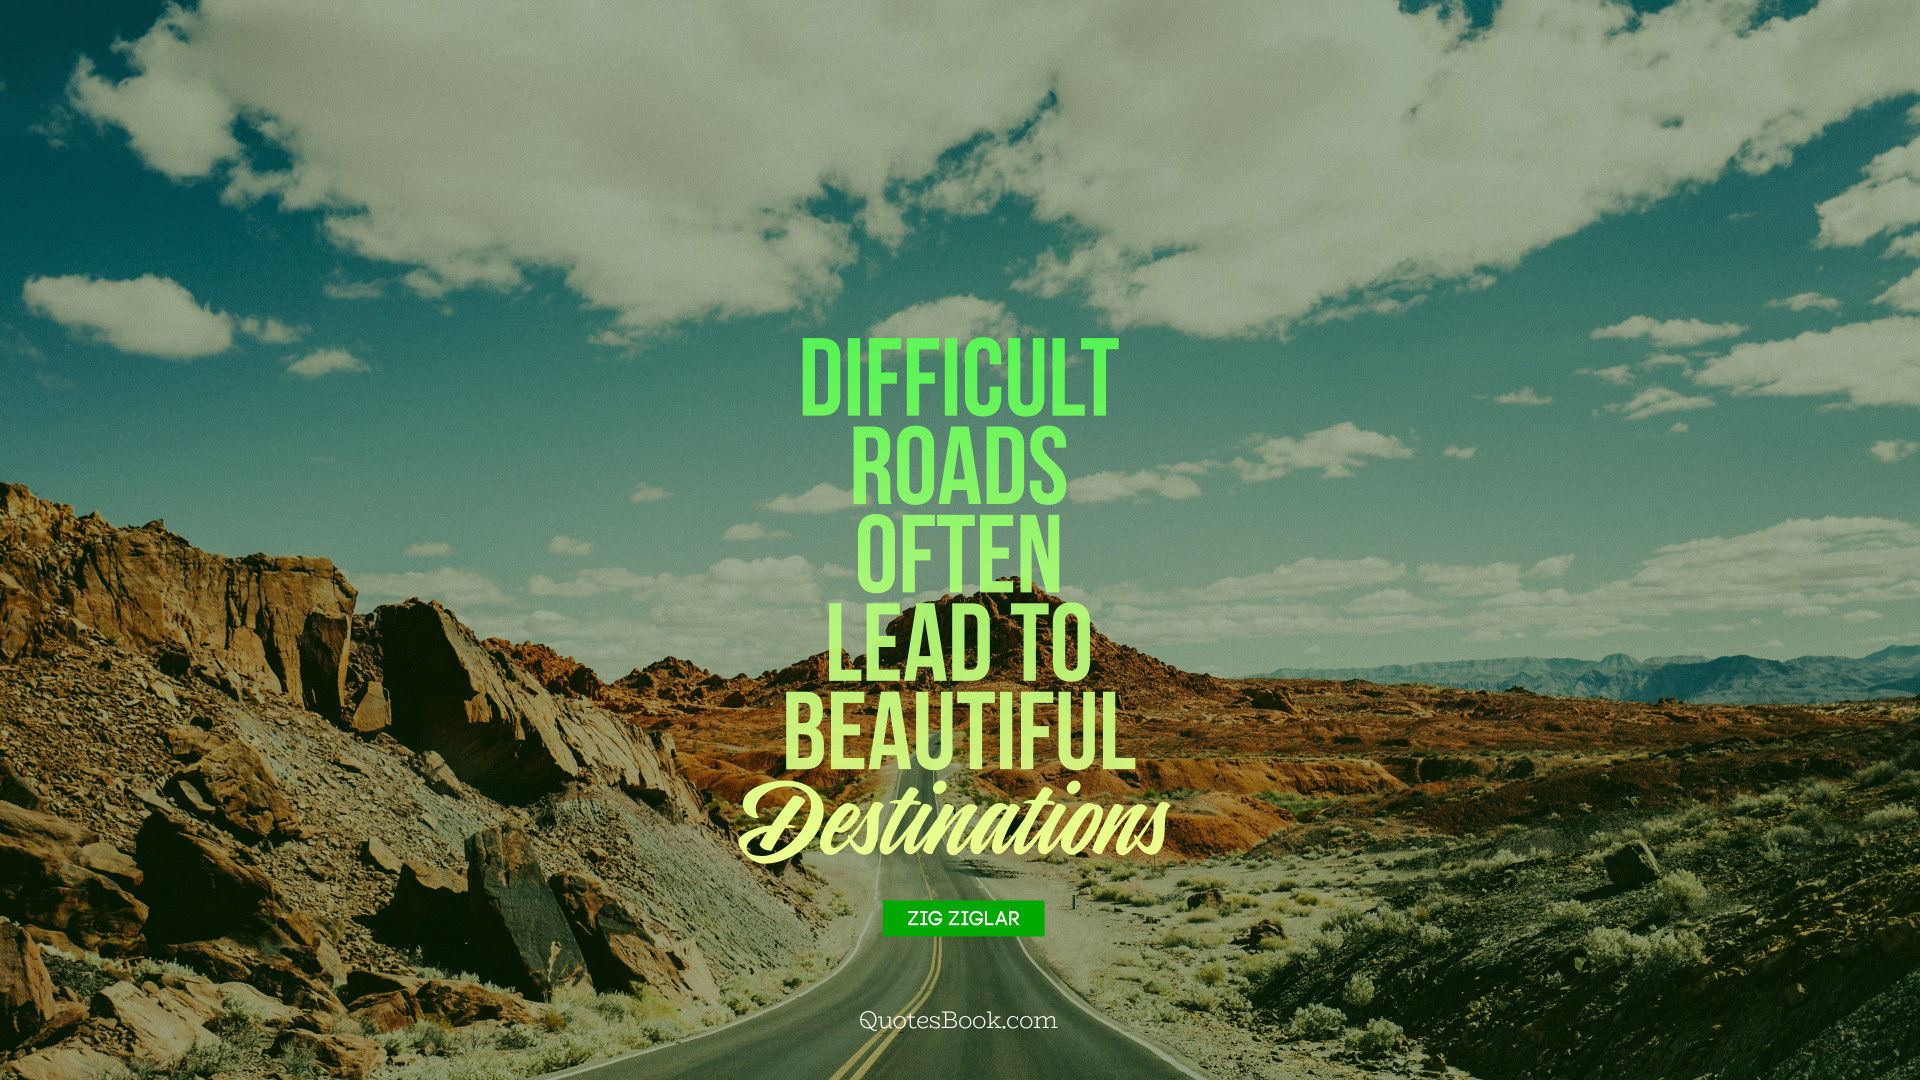 difficult roads often lead to beautiful destinations 1920x1080 1717